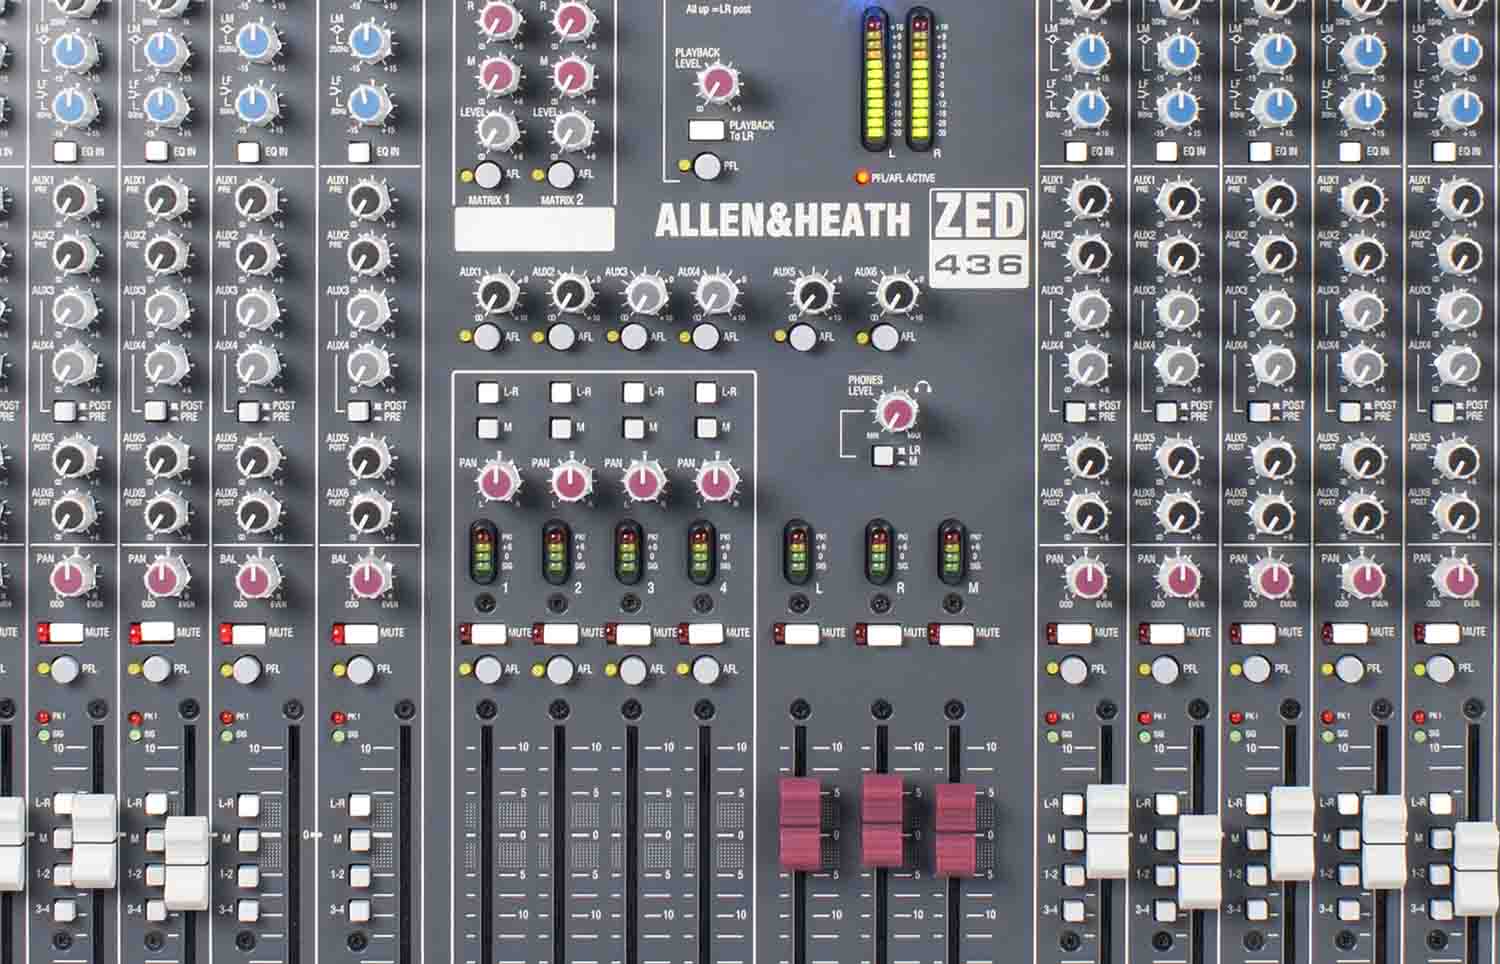 Allen & Heath ZED-436 4 Bus Mixer for Live Sound and Recording - Hollywood DJ